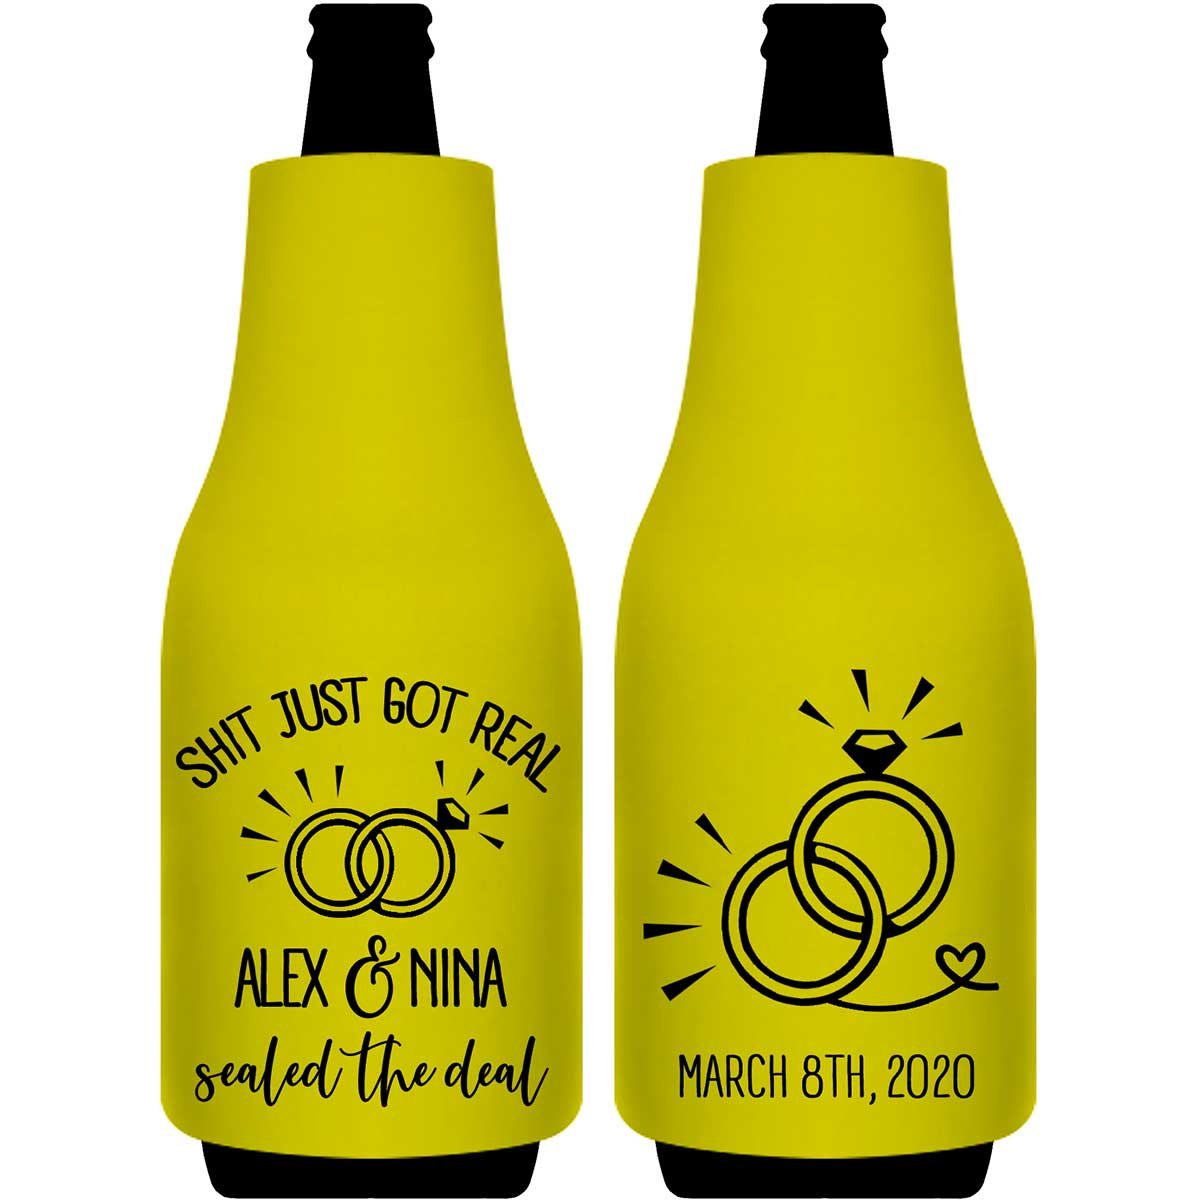 Shit Just Got Real 1A Foldable Bottle Sleeve Koozies Wedding Gifts for Guests